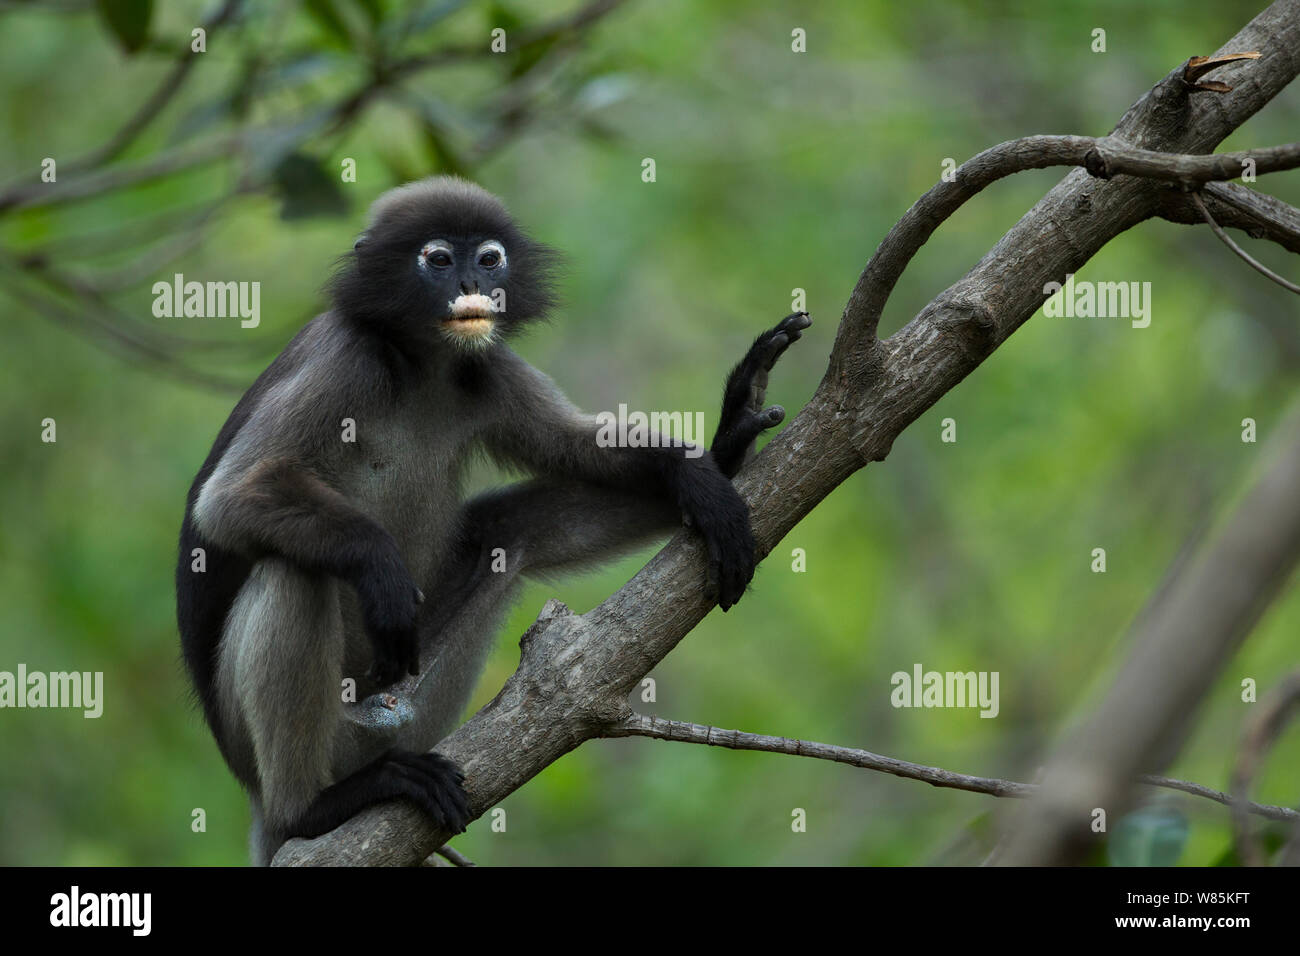 Dusky leaf monkey (Trachypithecus obscurus) male sitting in a tree . Khao Sam Roi Yot National Park, Thailand. Stock Photo